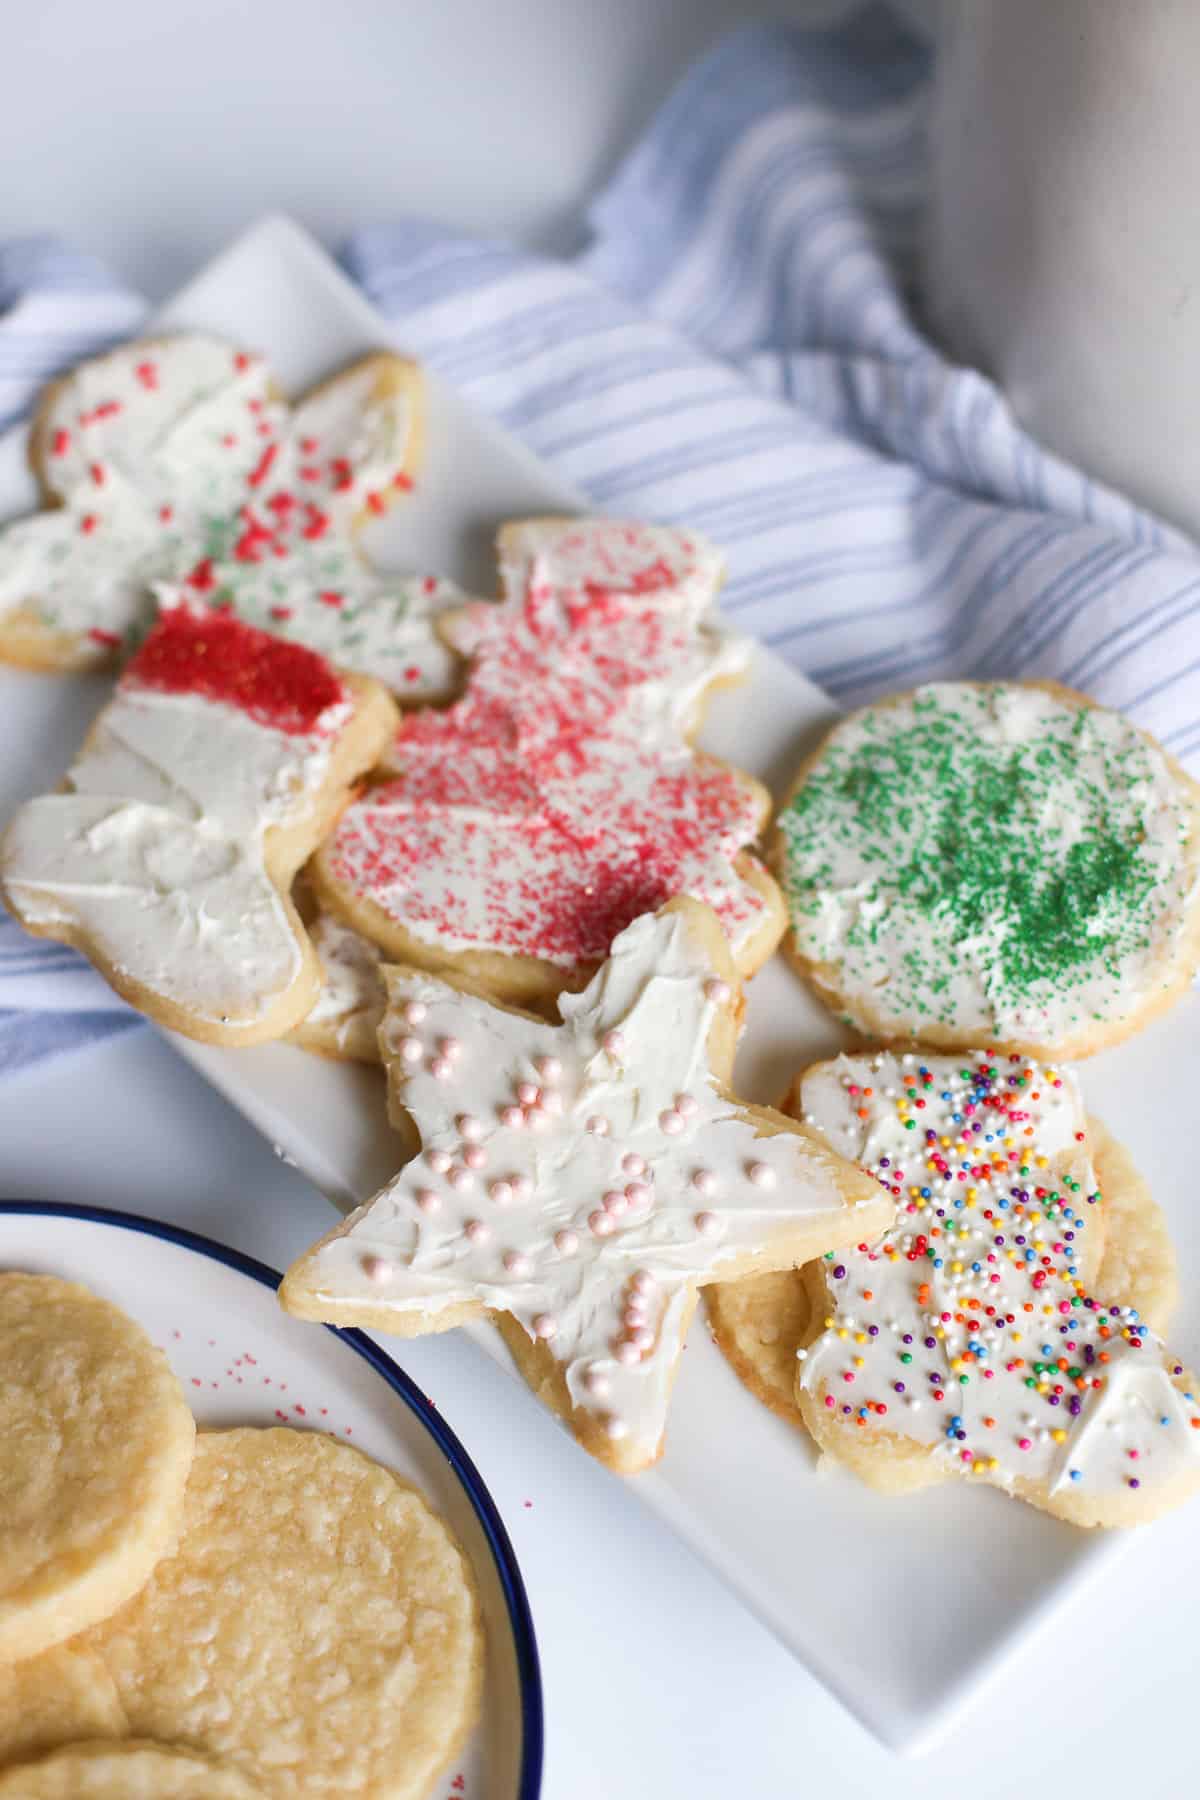 Decorated cream cheese sugar cookies on a platter with some undecorated ones on a plate next to it.